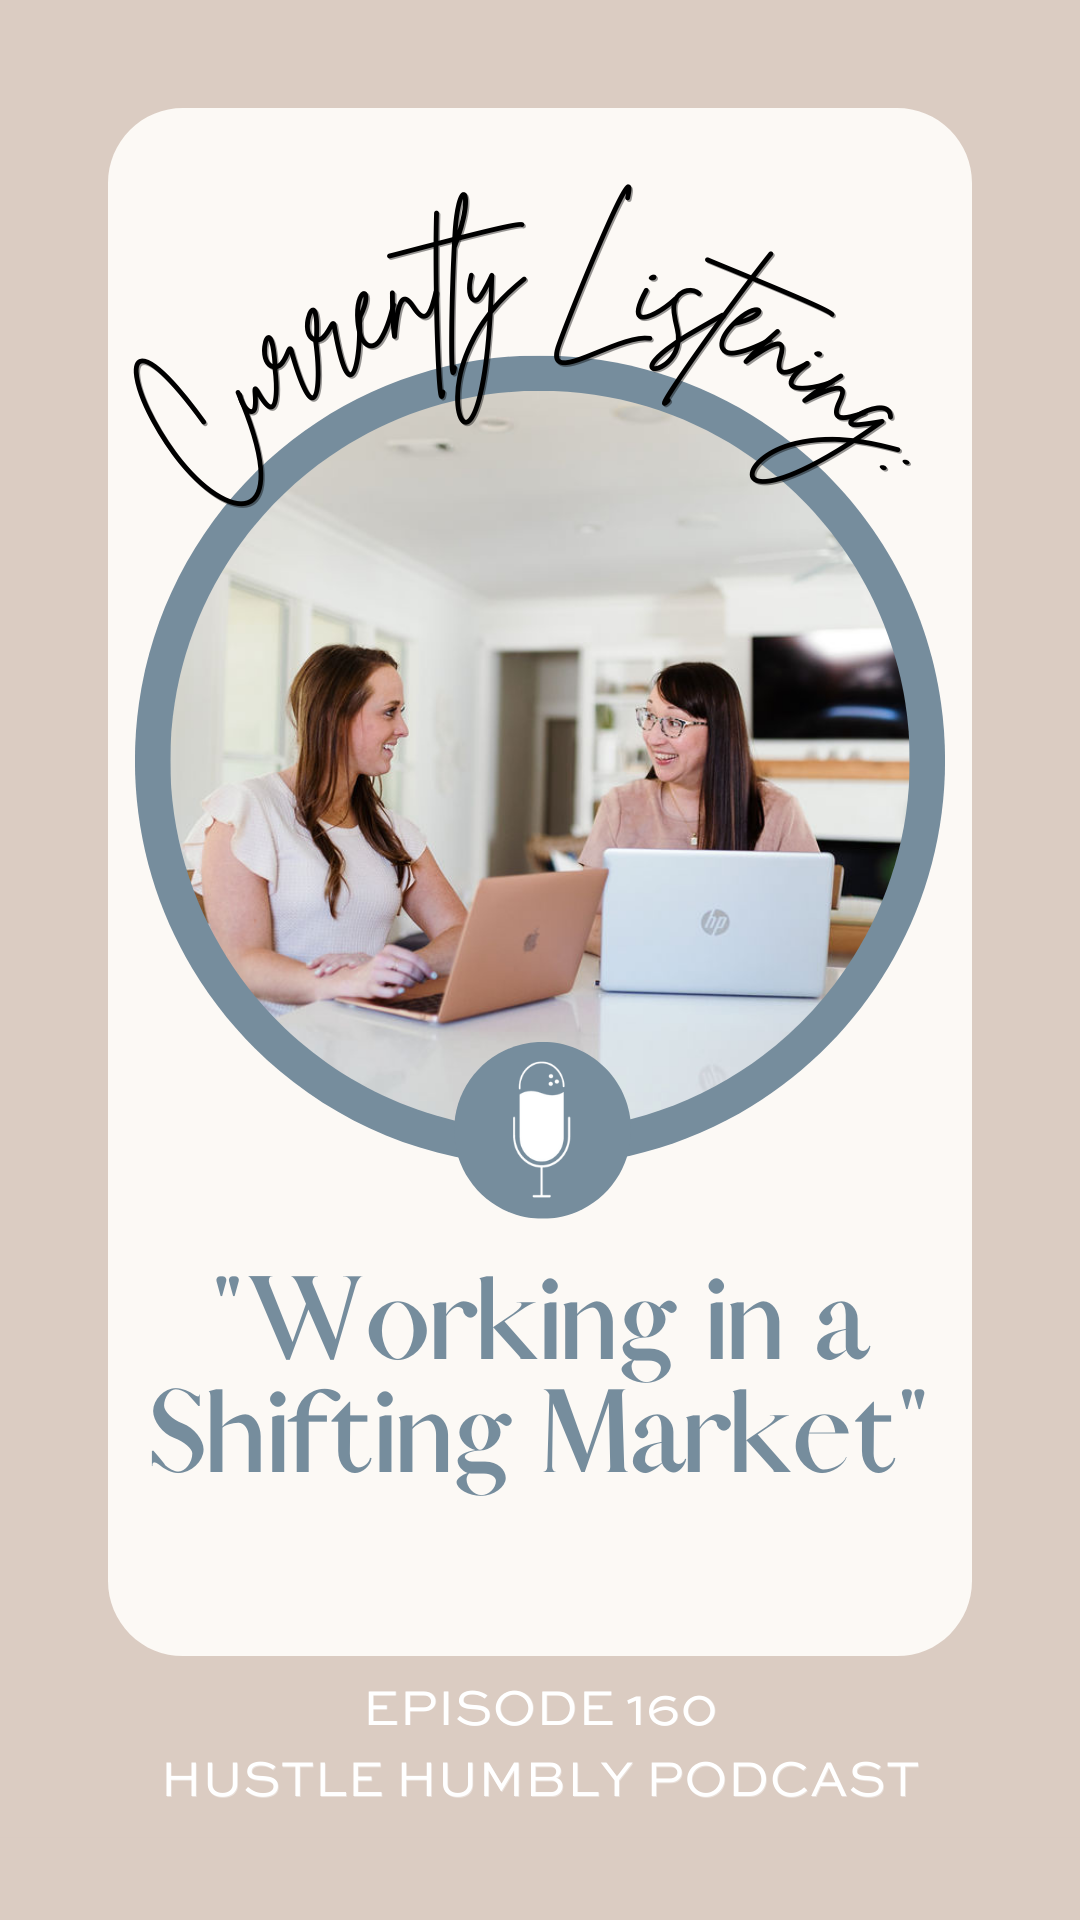 Hustle Humbly Podcast Episode 160: Working in a Shifting Market